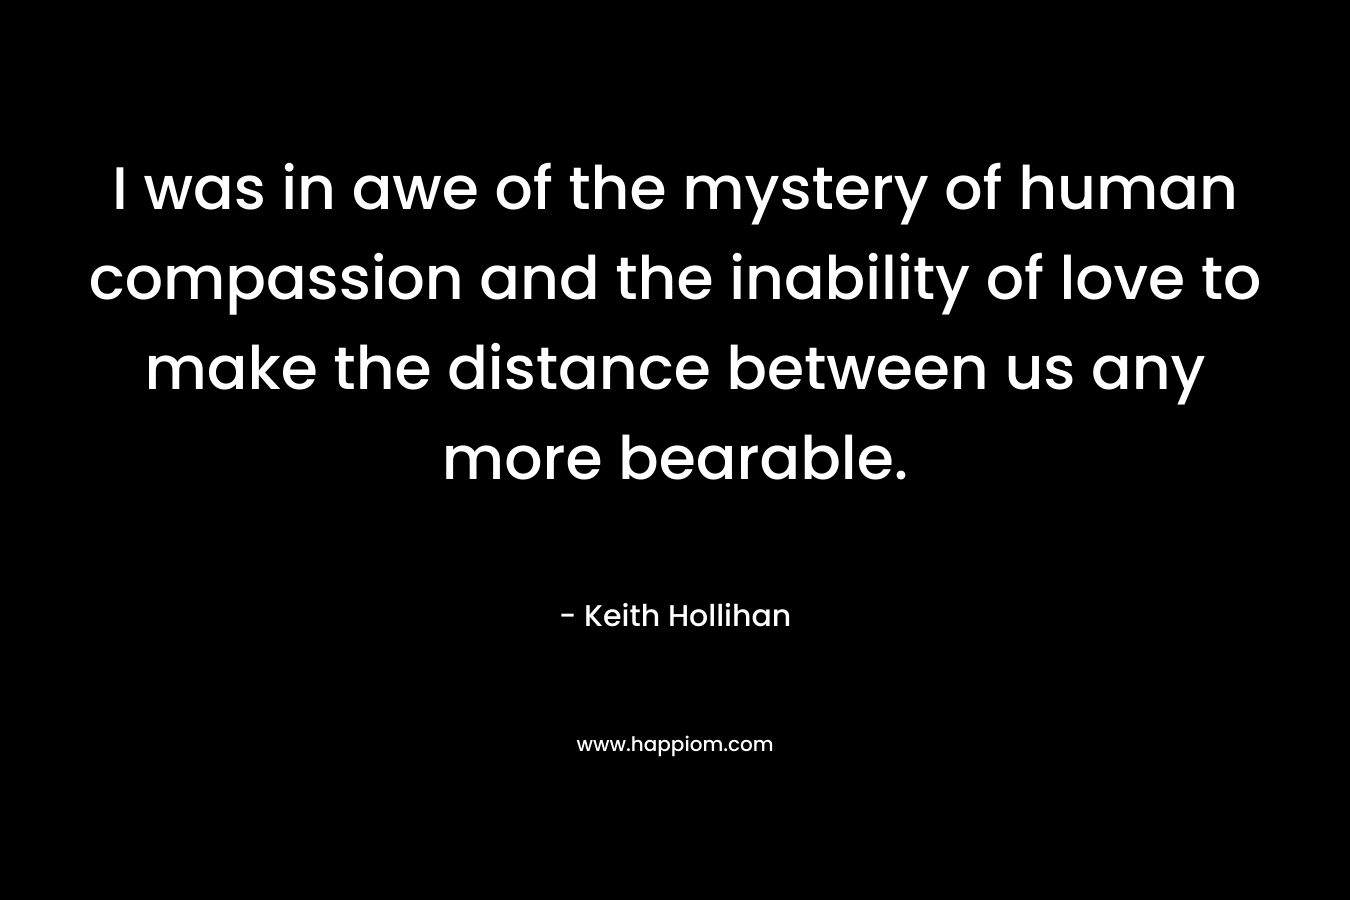 I was in awe of the mystery of human compassion and the inability of love to make the distance between us any more bearable. – Keith Hollihan